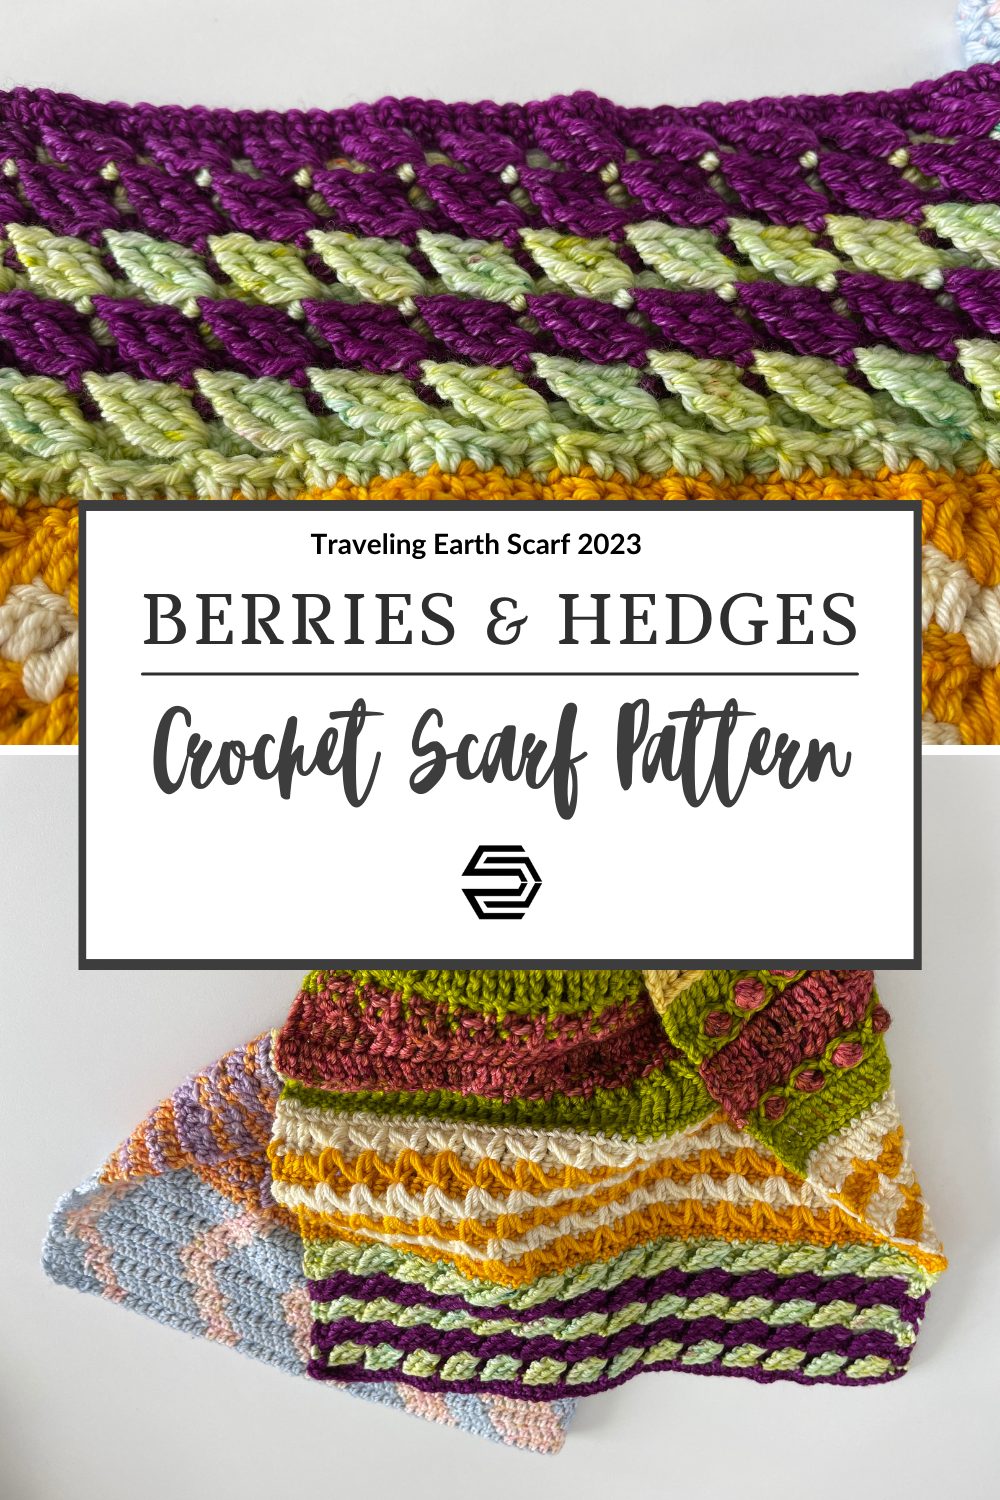 A close up image of the Berries & Hedges Crochet Scarf section made of purple and light green yarn. The crochet scarf has stitches that lean to the left in a group of three.